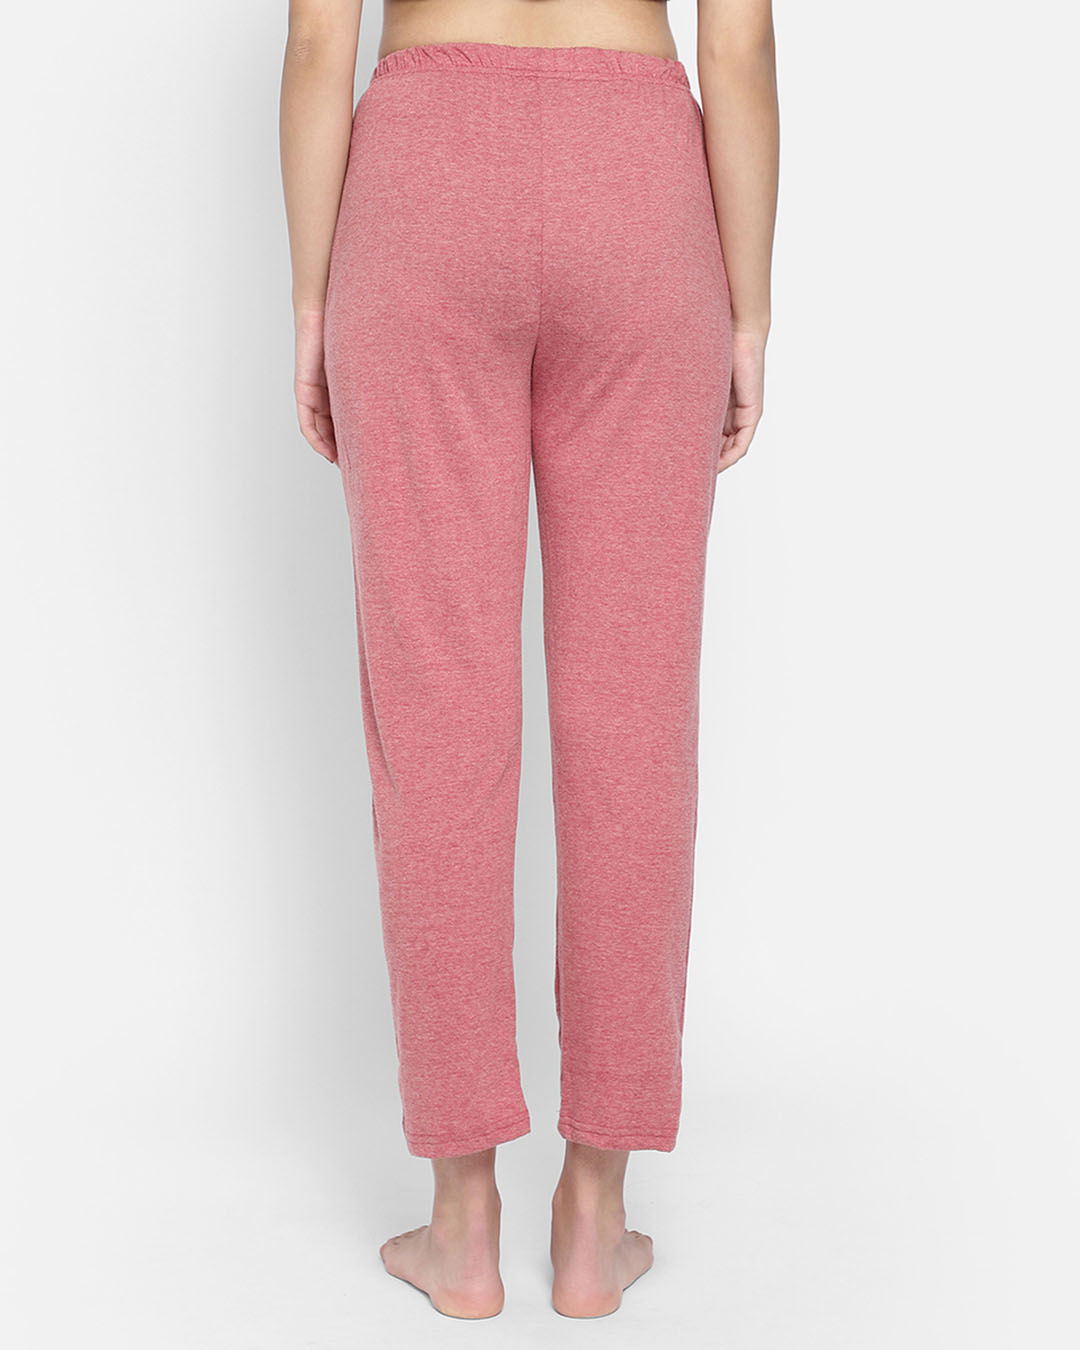 Shop Chic Basic Pyjamas In Dusty Pink   Cotton Rich-Back